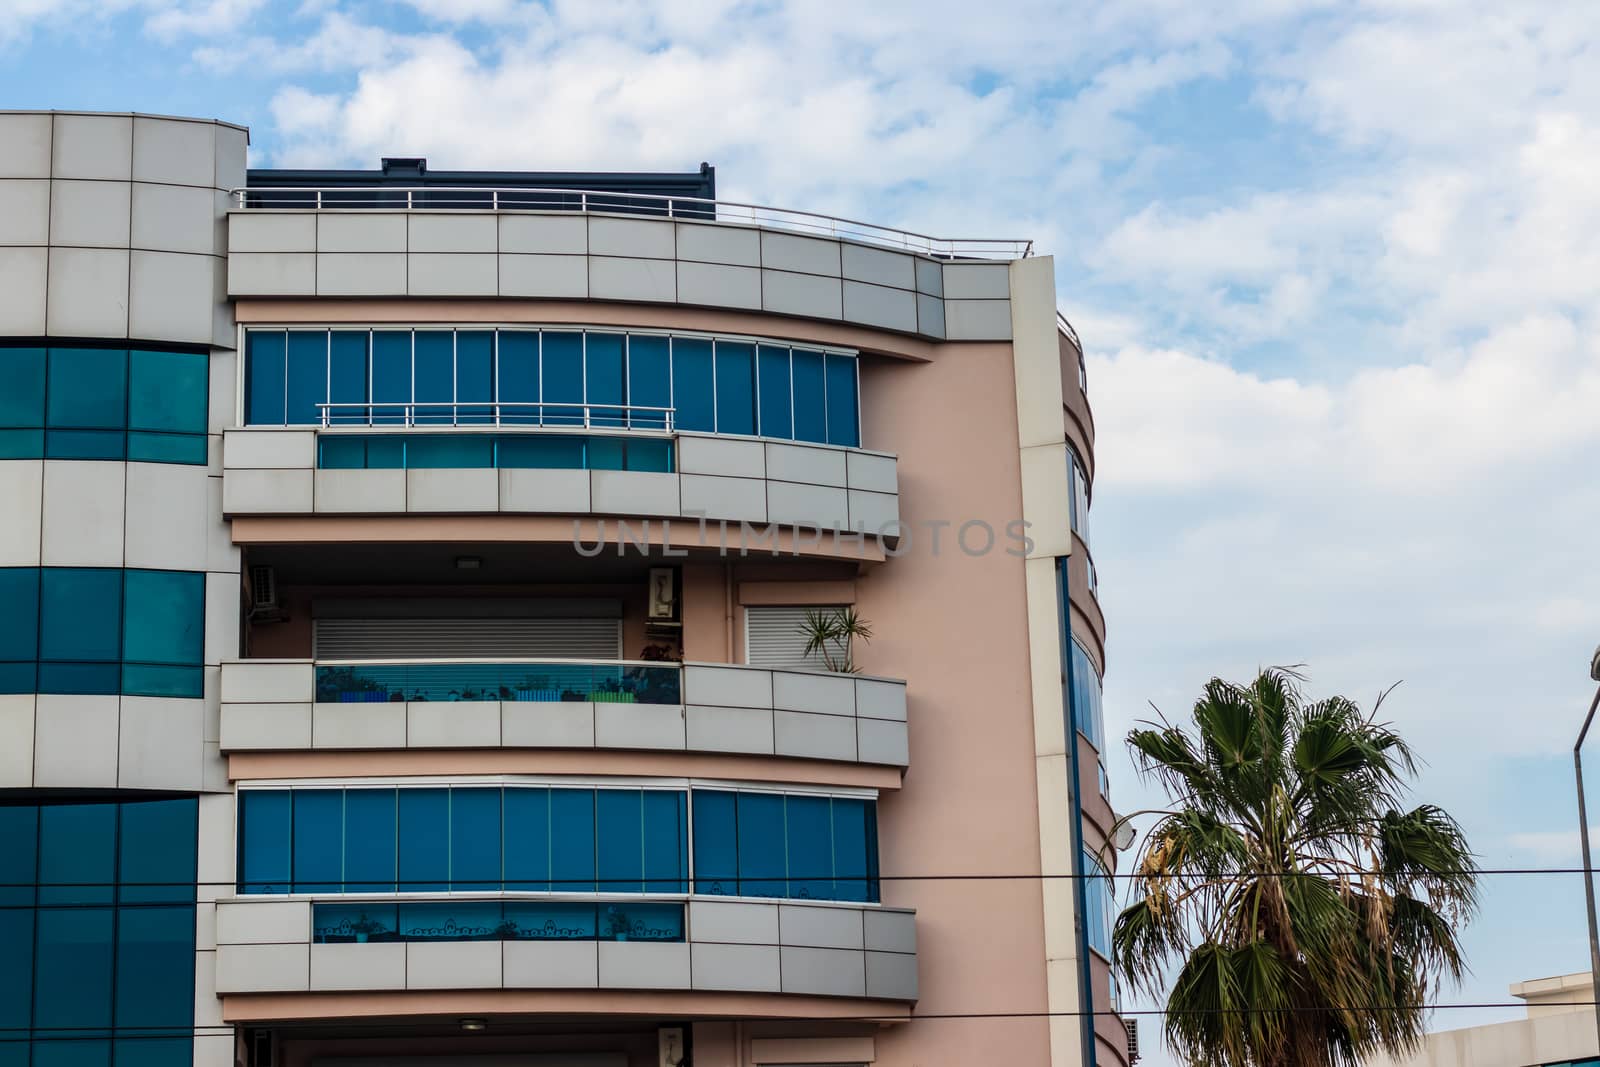 a corner shoot from an modern building with balcony - sky landscape as background. photo has taken at izmir/turkey.